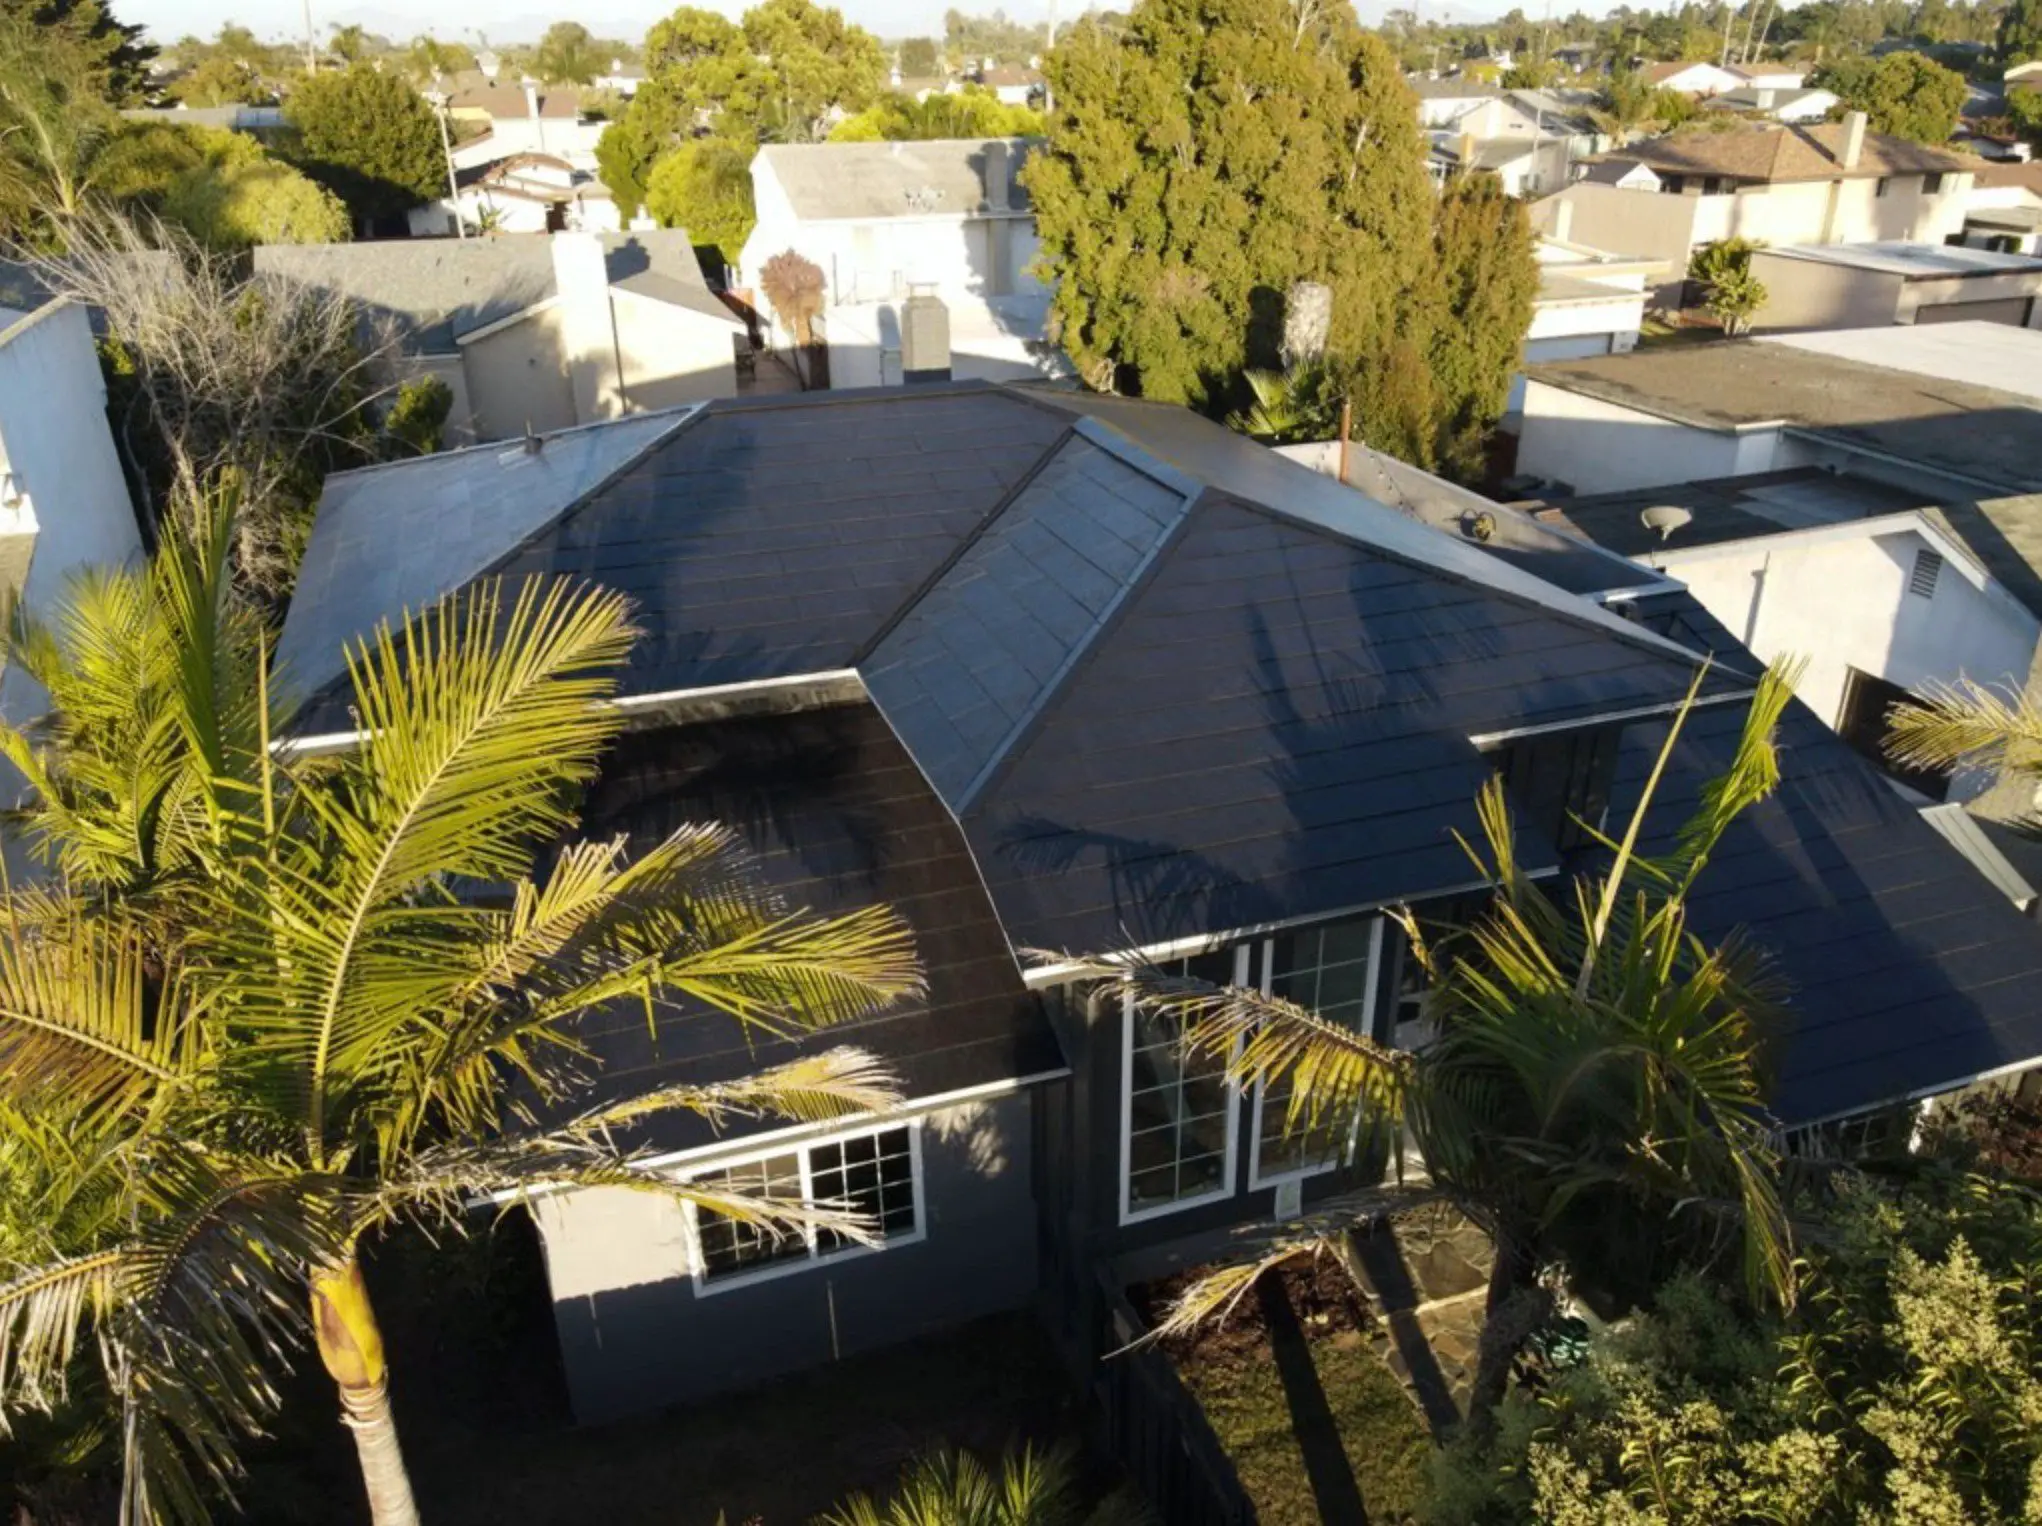 A Tesla Solar Roof system is deployed for under $30,000 ...